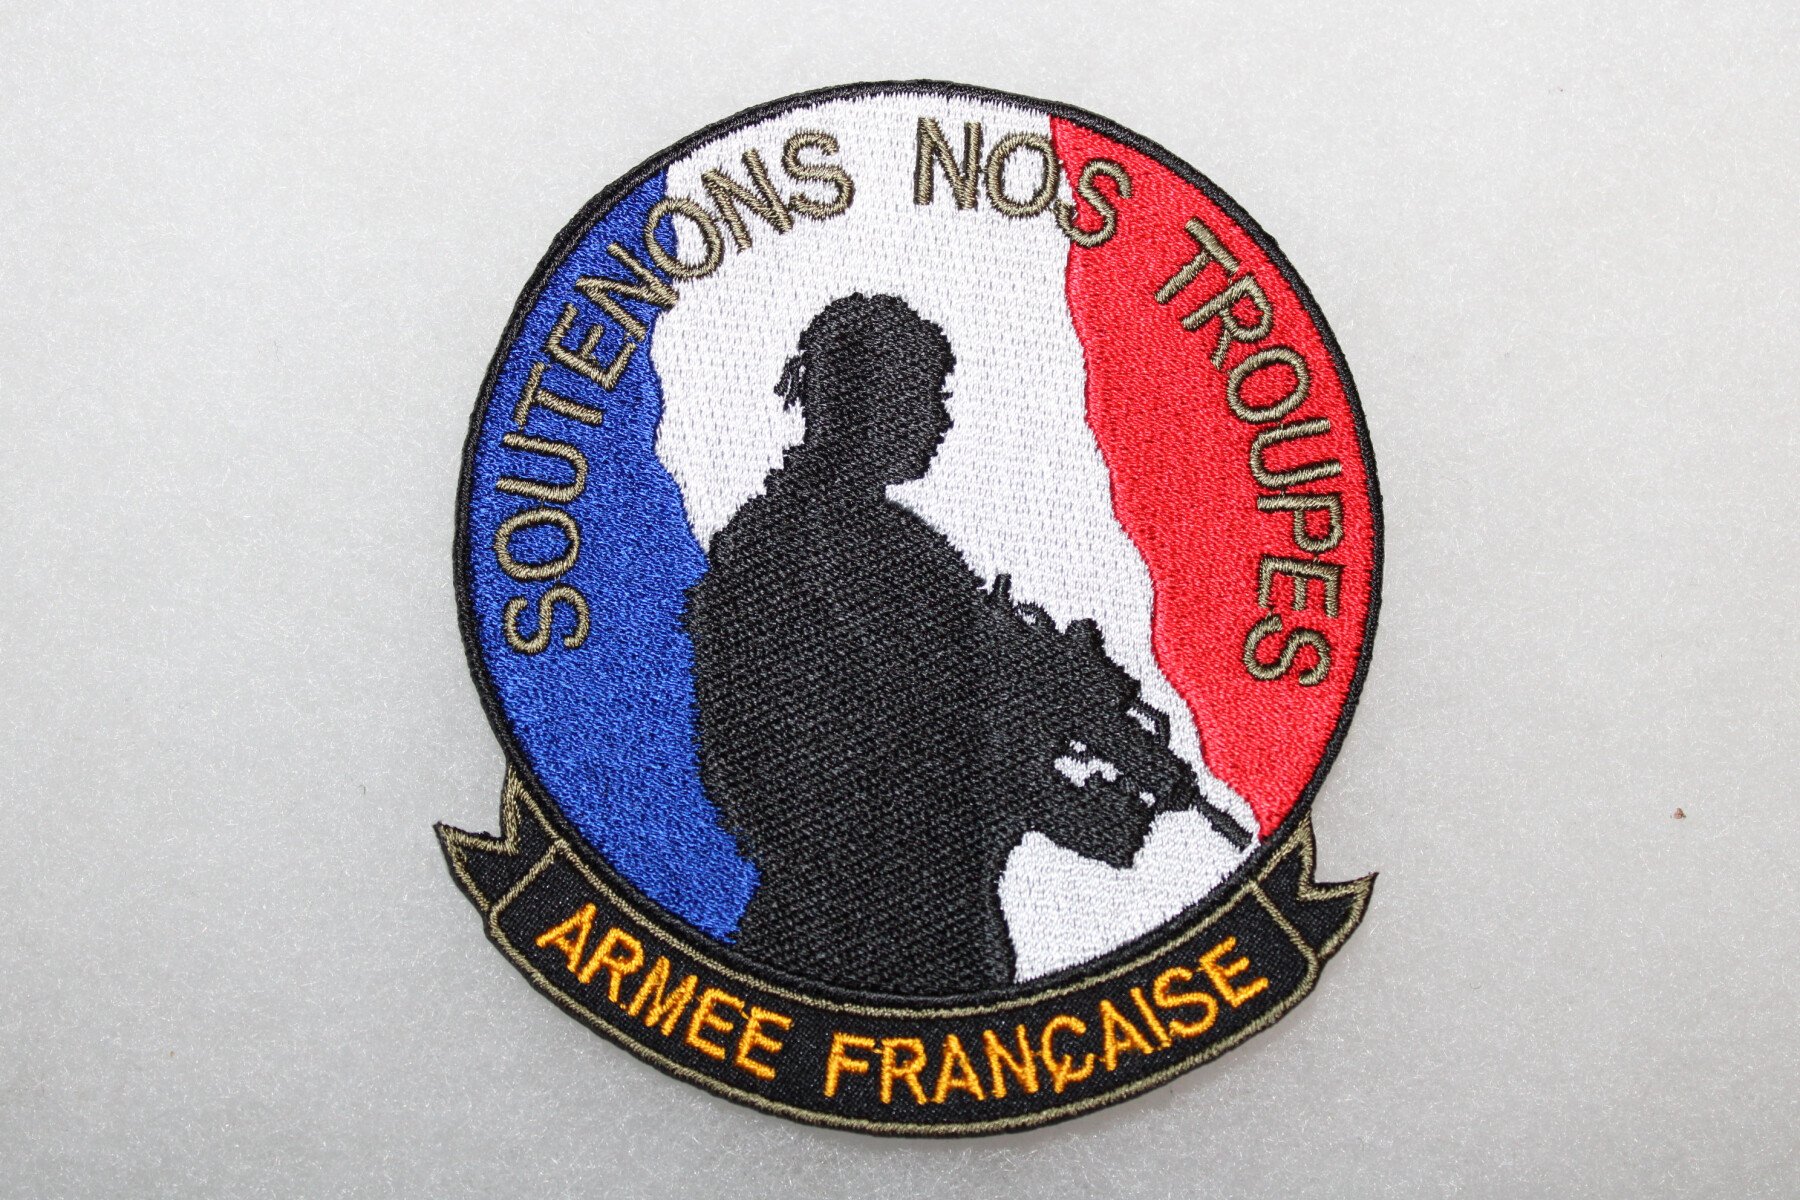 https://www.chrismilitaria.com/storage/media/4092/conversions/patch-soutenons-nos-troupes-armee-IMG_4390-product-show-full.jpg